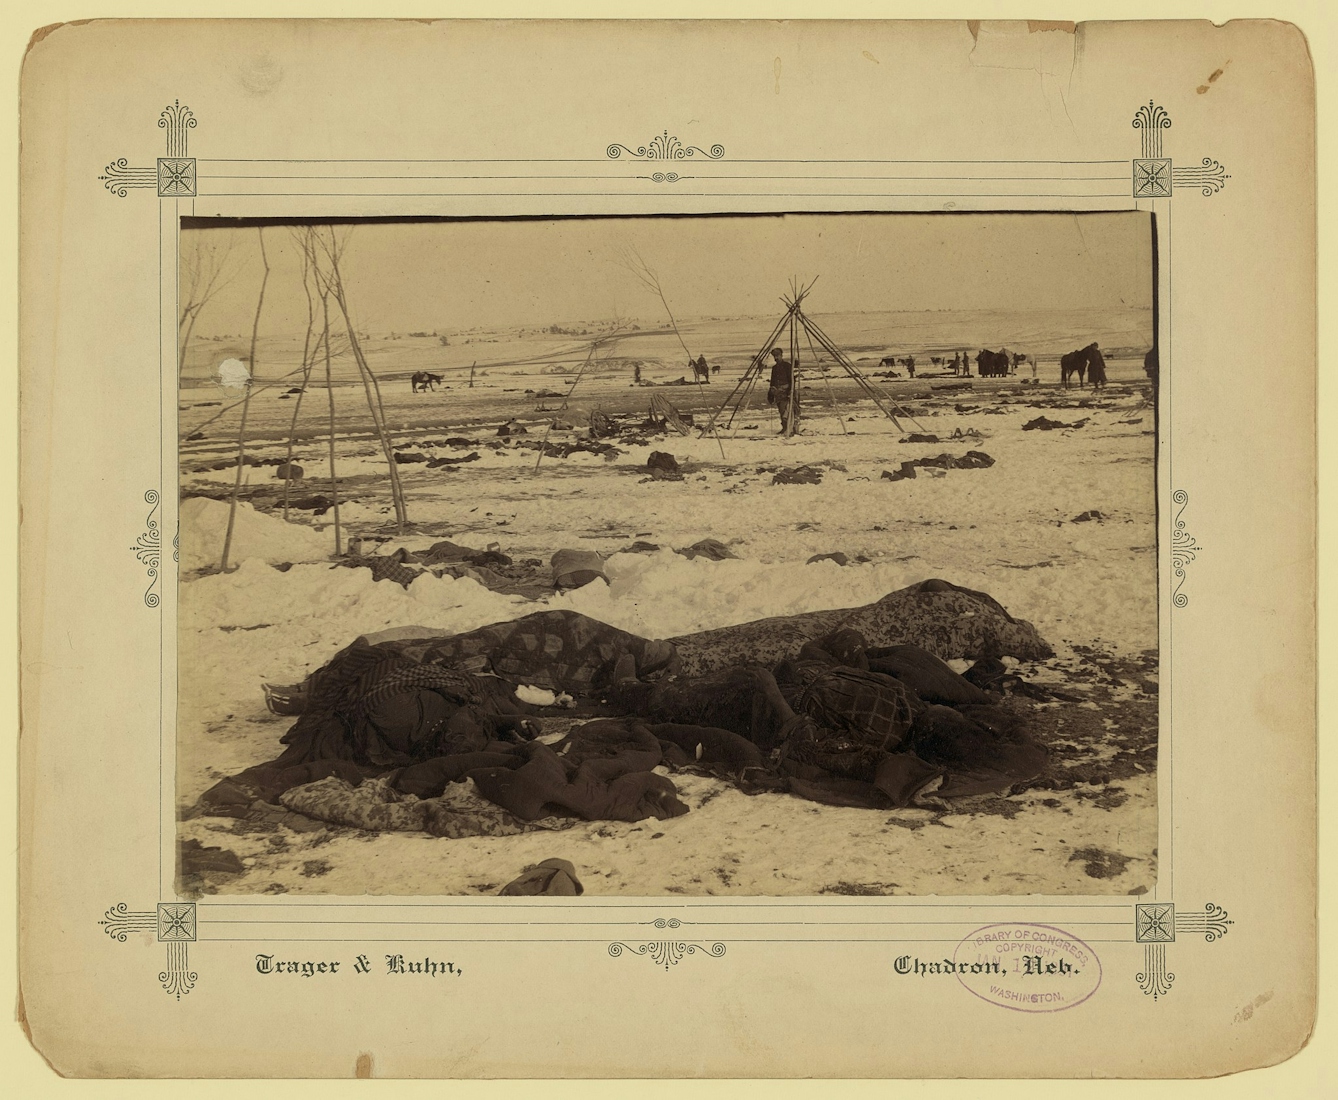 Big Foot's camp after Battle of Wounded Knee